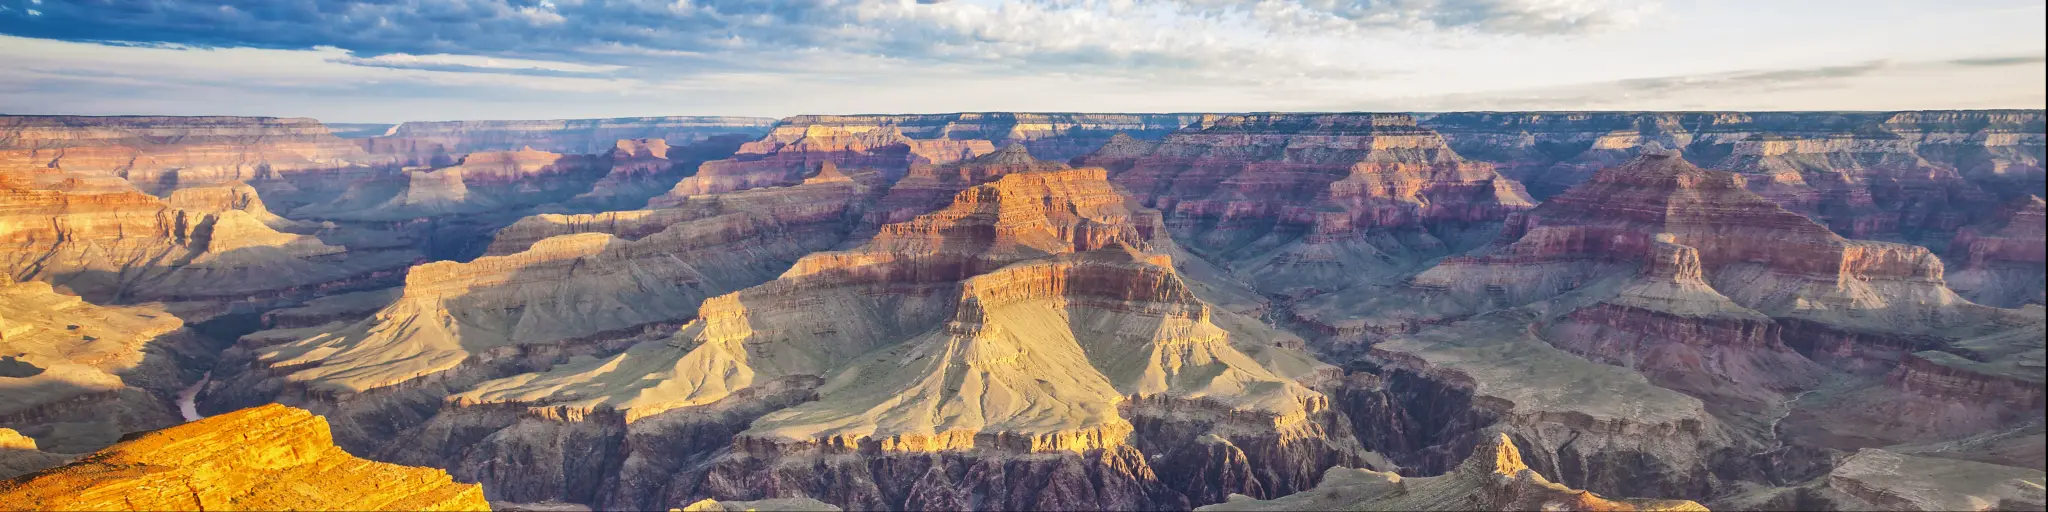 A breathtaking view of the Grand Canyon illuminated by the morning light with a cloudy sky